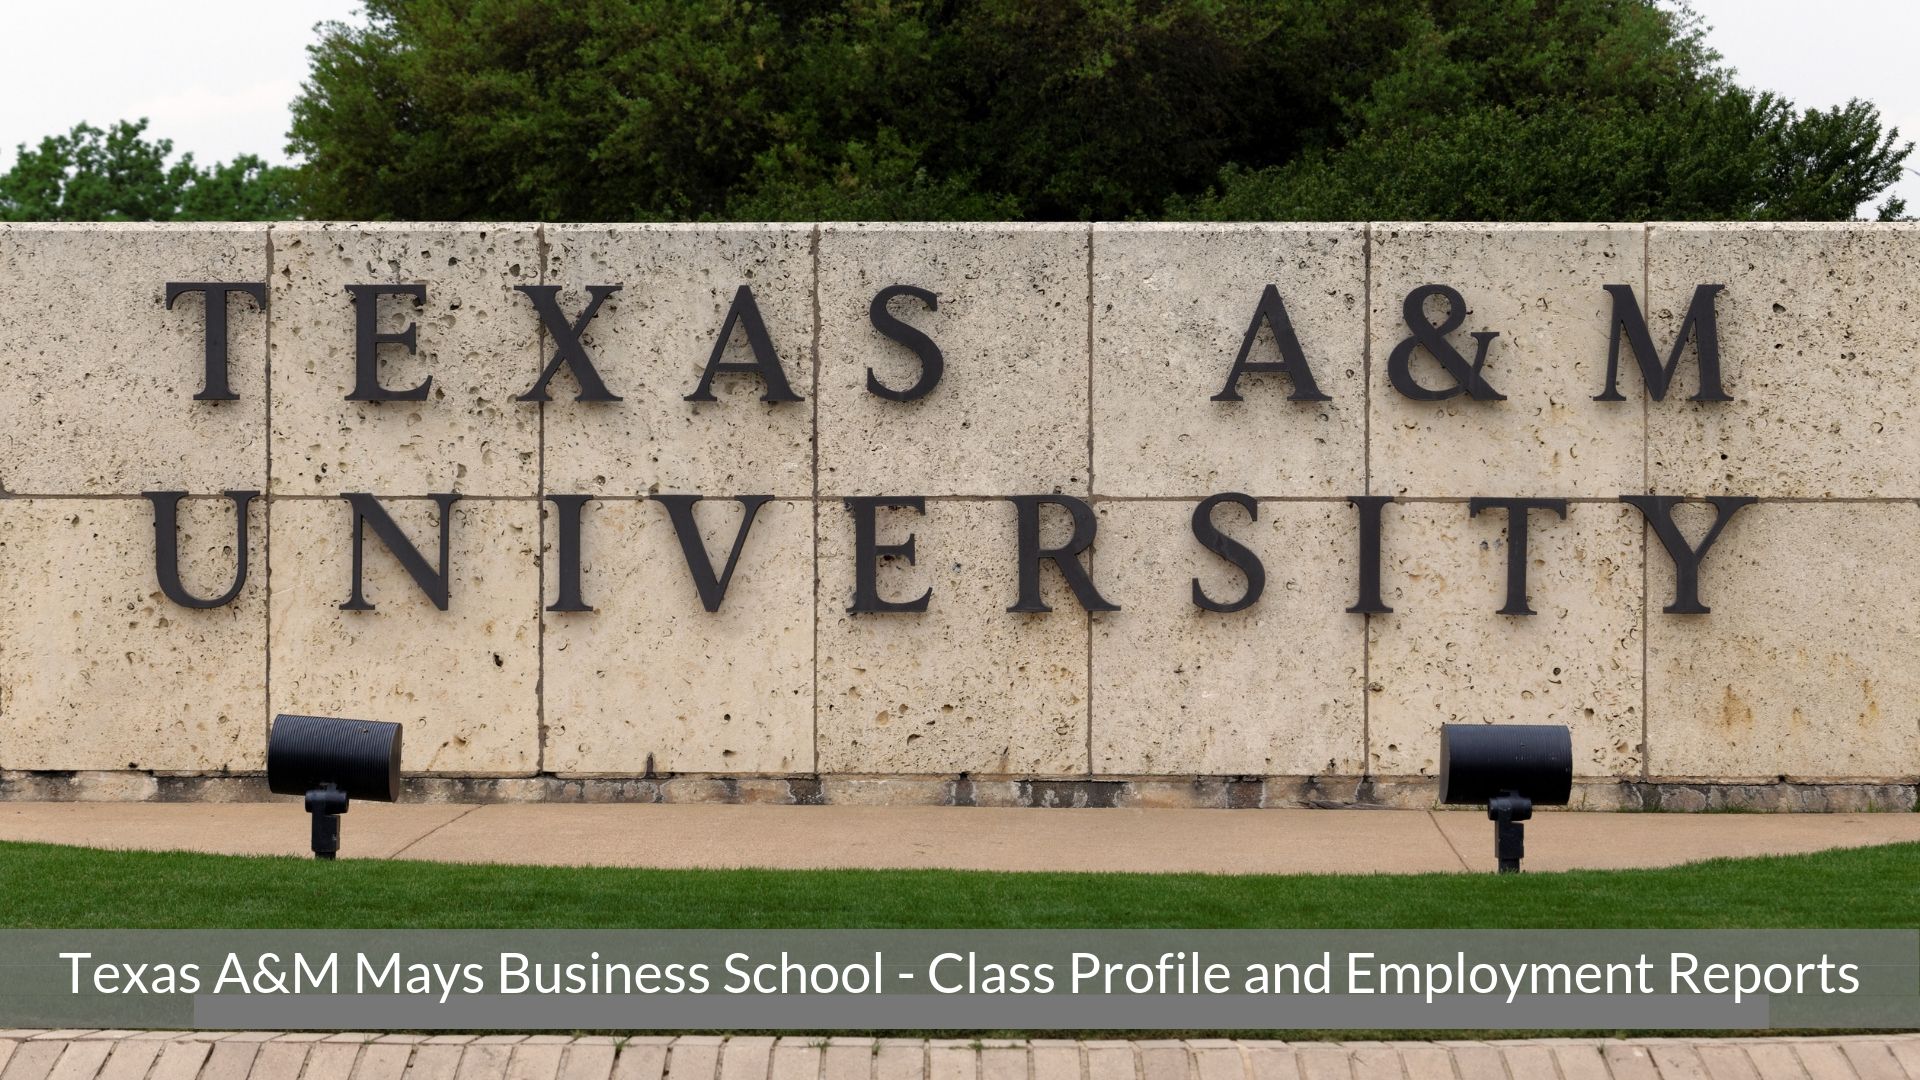 Texas A&M Mays Business School - Mays MBA Programs - Class Profile _ Notable Alumni _ Employment Reports